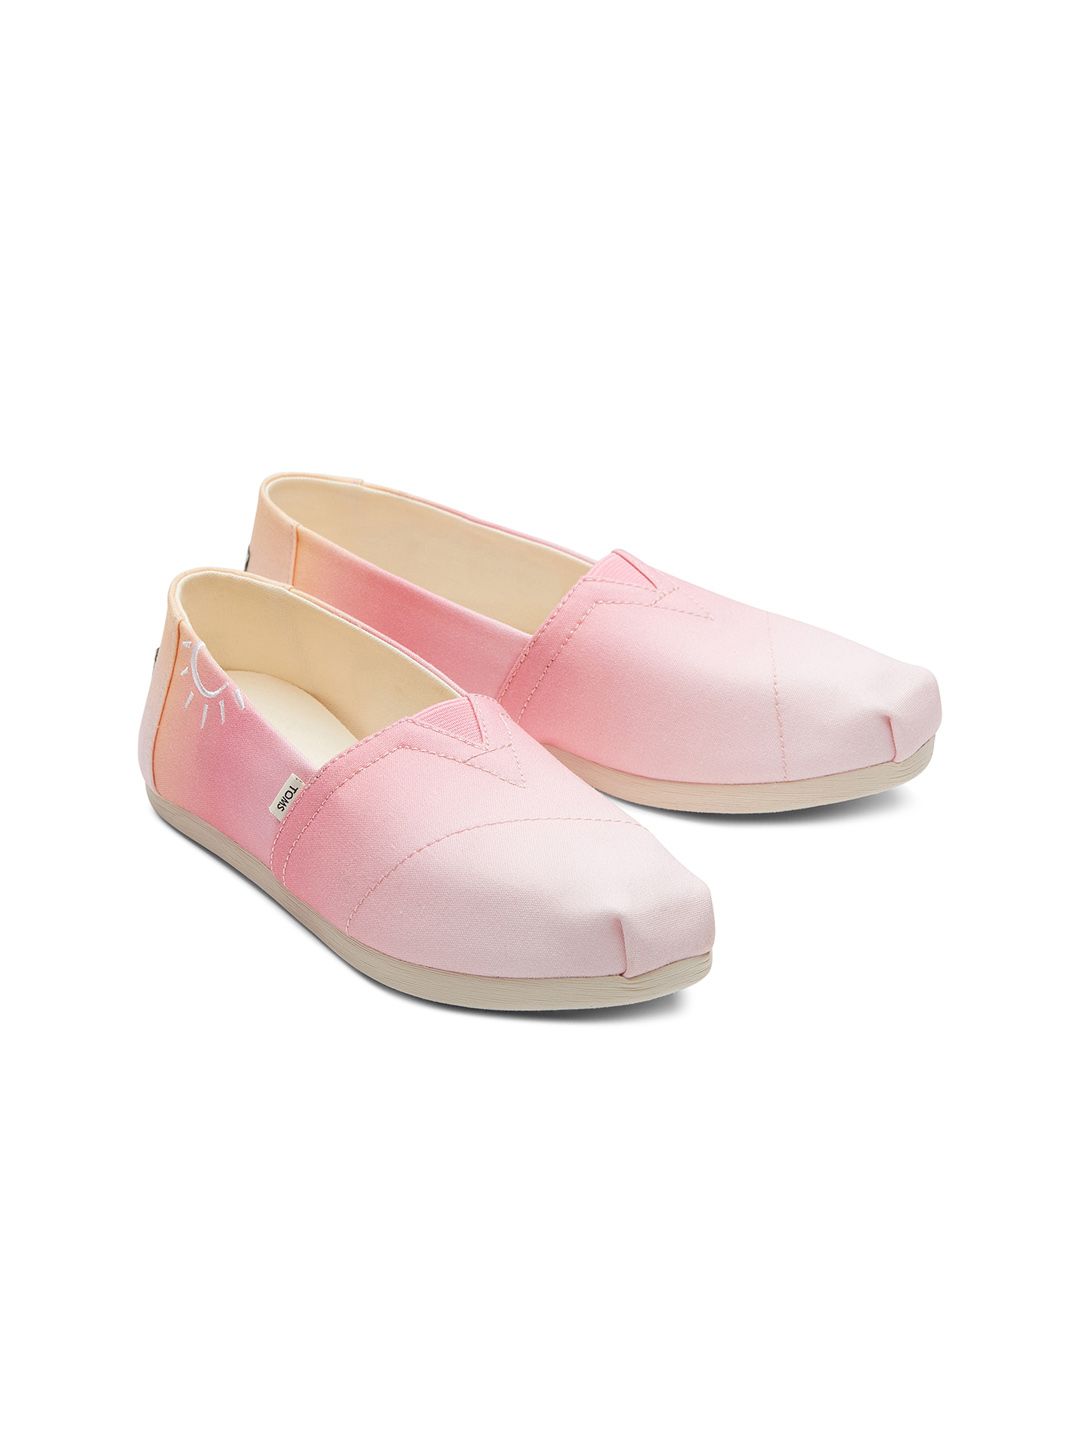 TOMS Women Pink Ombre Canvas Alpargata Slip-On Sneakers Price in India